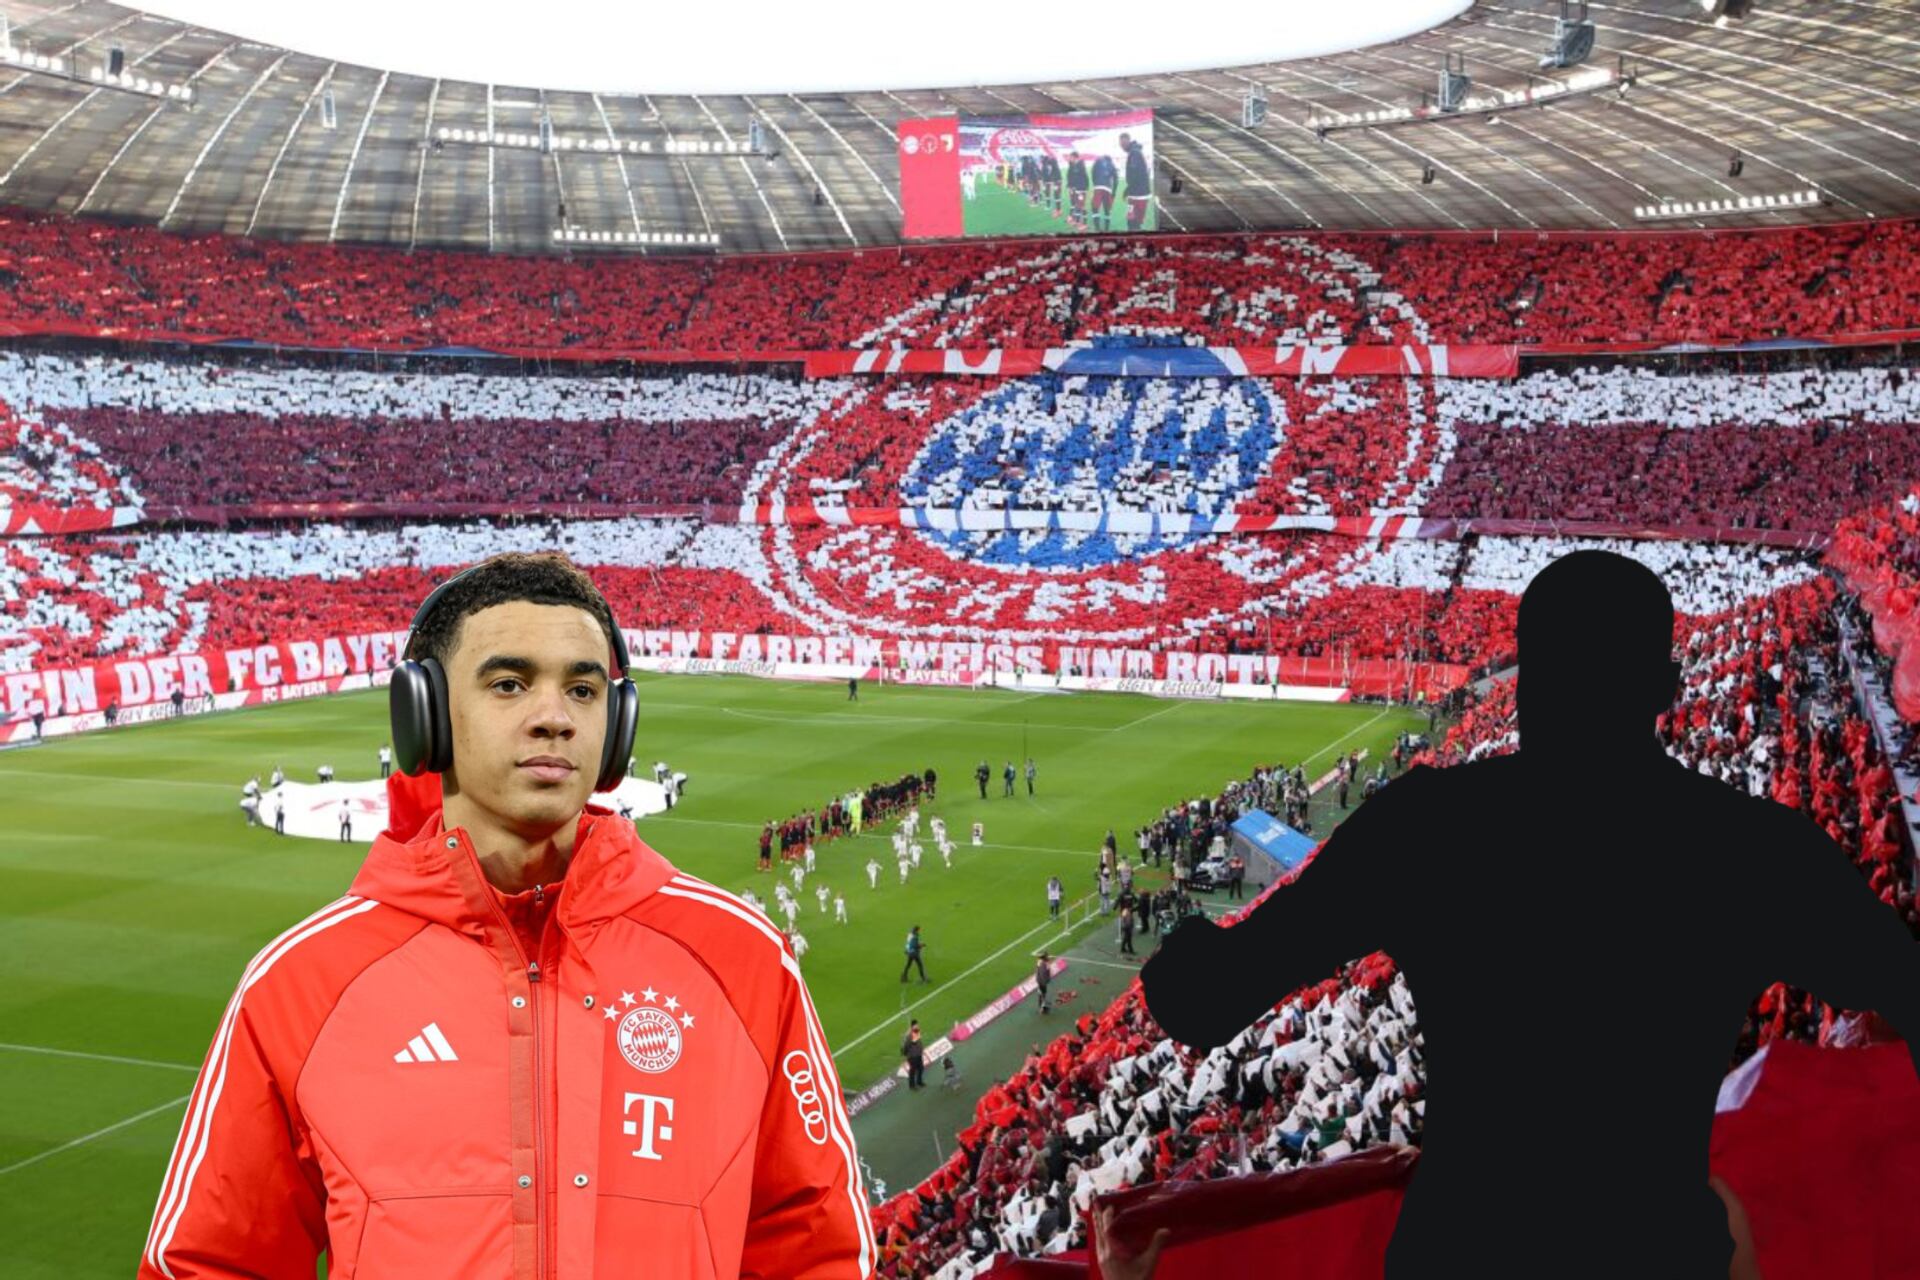 Not Musiala, the Bayern Munich star who's more likely to join the Premier League